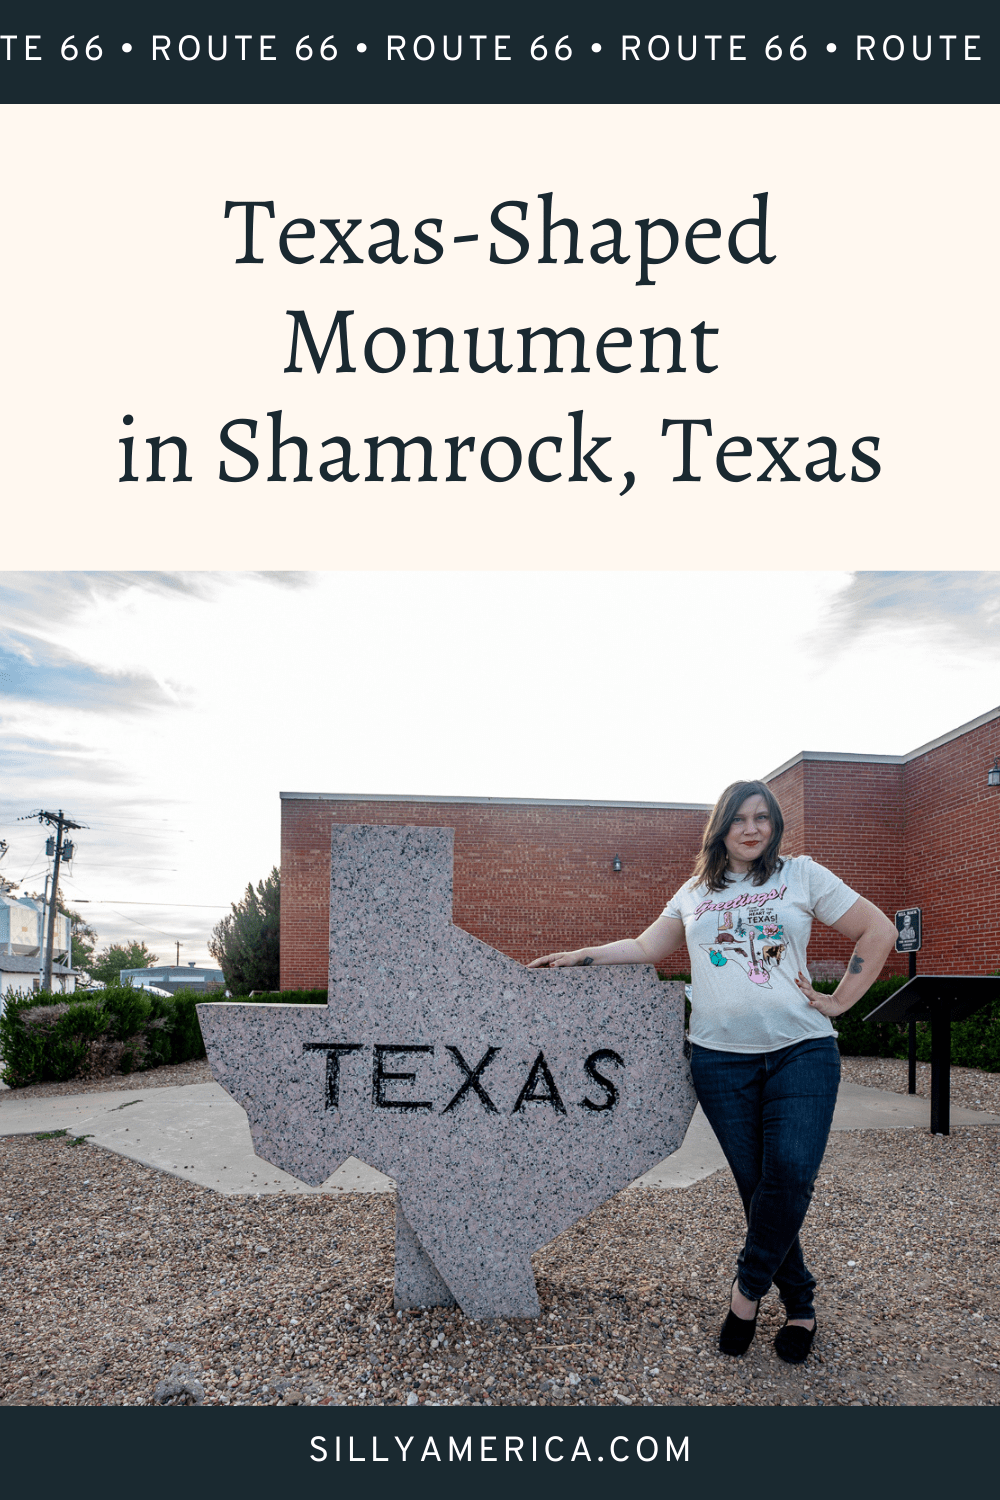 Everything is bigger in Texas, so it is only appropriate to find a big, well, Texas, there. Find this big Texas-shaped monument in Shamrock, Texas on Route 66. This roadside attraction is located at the historic Conoco Tower Station and U-Drop Inn Café in Shamrock, Texas on Route 66.  #RoadTrips #RoadTripStop #Route66 #Route66RoadTrip #TexasRoute66 #Texas #TexasRoadTrip #TexasRoadsideAttractions #RoadsideAttractions #RoadsideAttraction #RoadsideAmerica #RoadTrip 